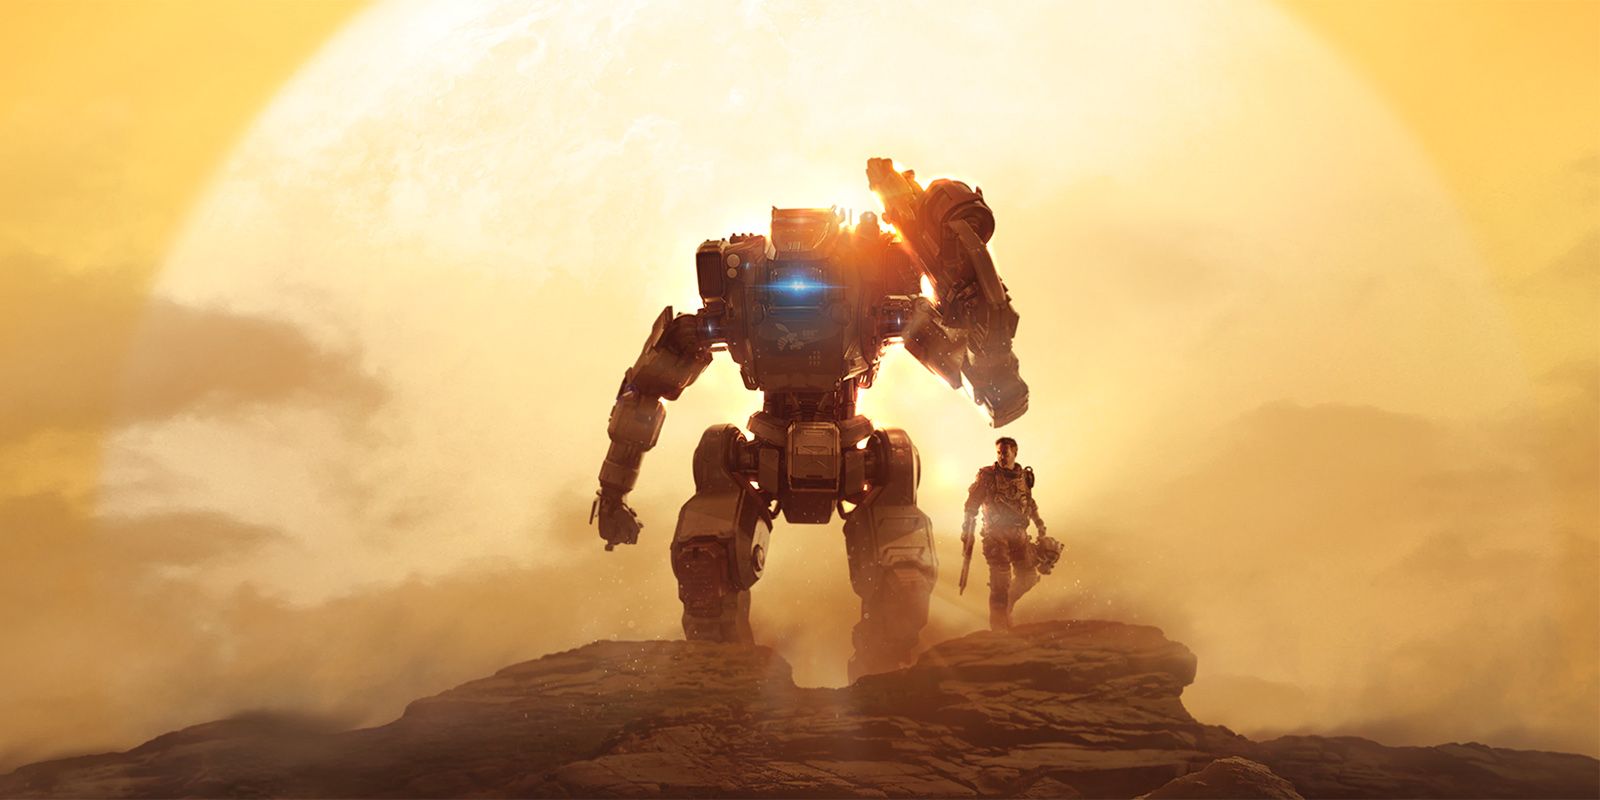 Jack Cooper from Titanfall 2 stands next to BT, his Titan as the sun sets behind them.